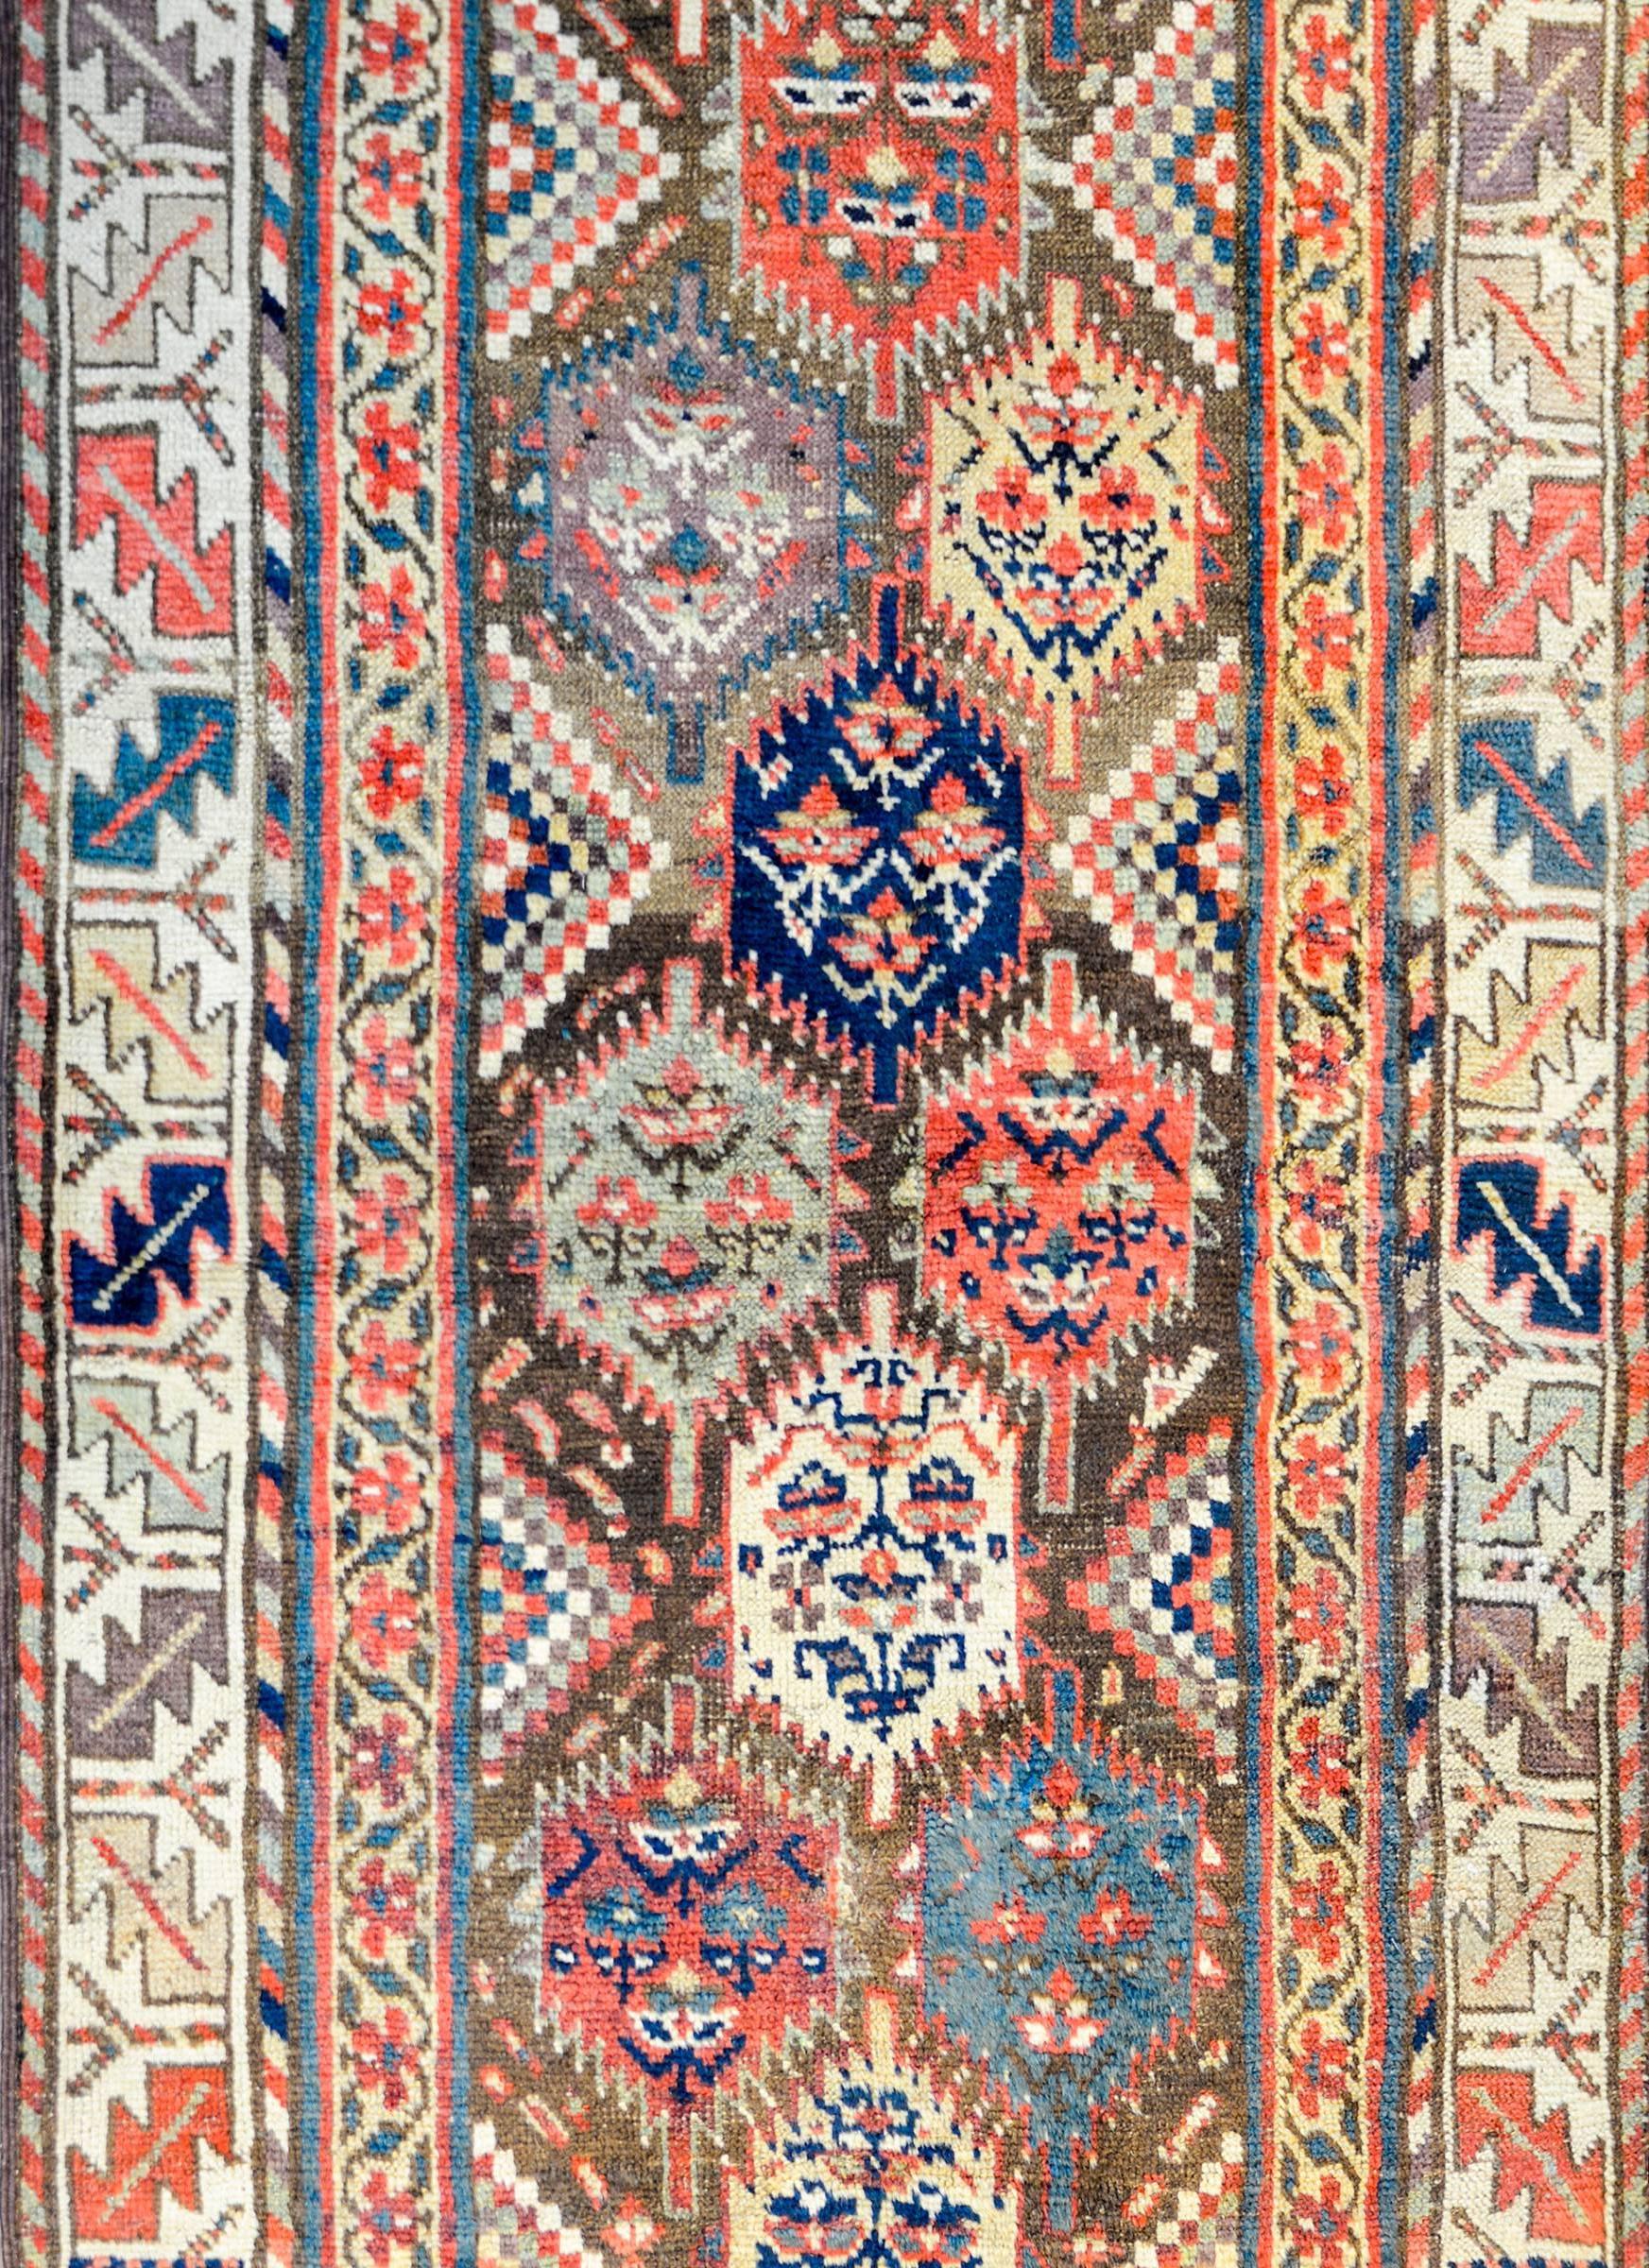 A wonderful early 20th century Persian Qasgqai runner with multiple multicolored hexagonal medallions, each with stylized trees-of-life on a brown background flanked. The border is comprised of three distinct patterns, the inner being a floral